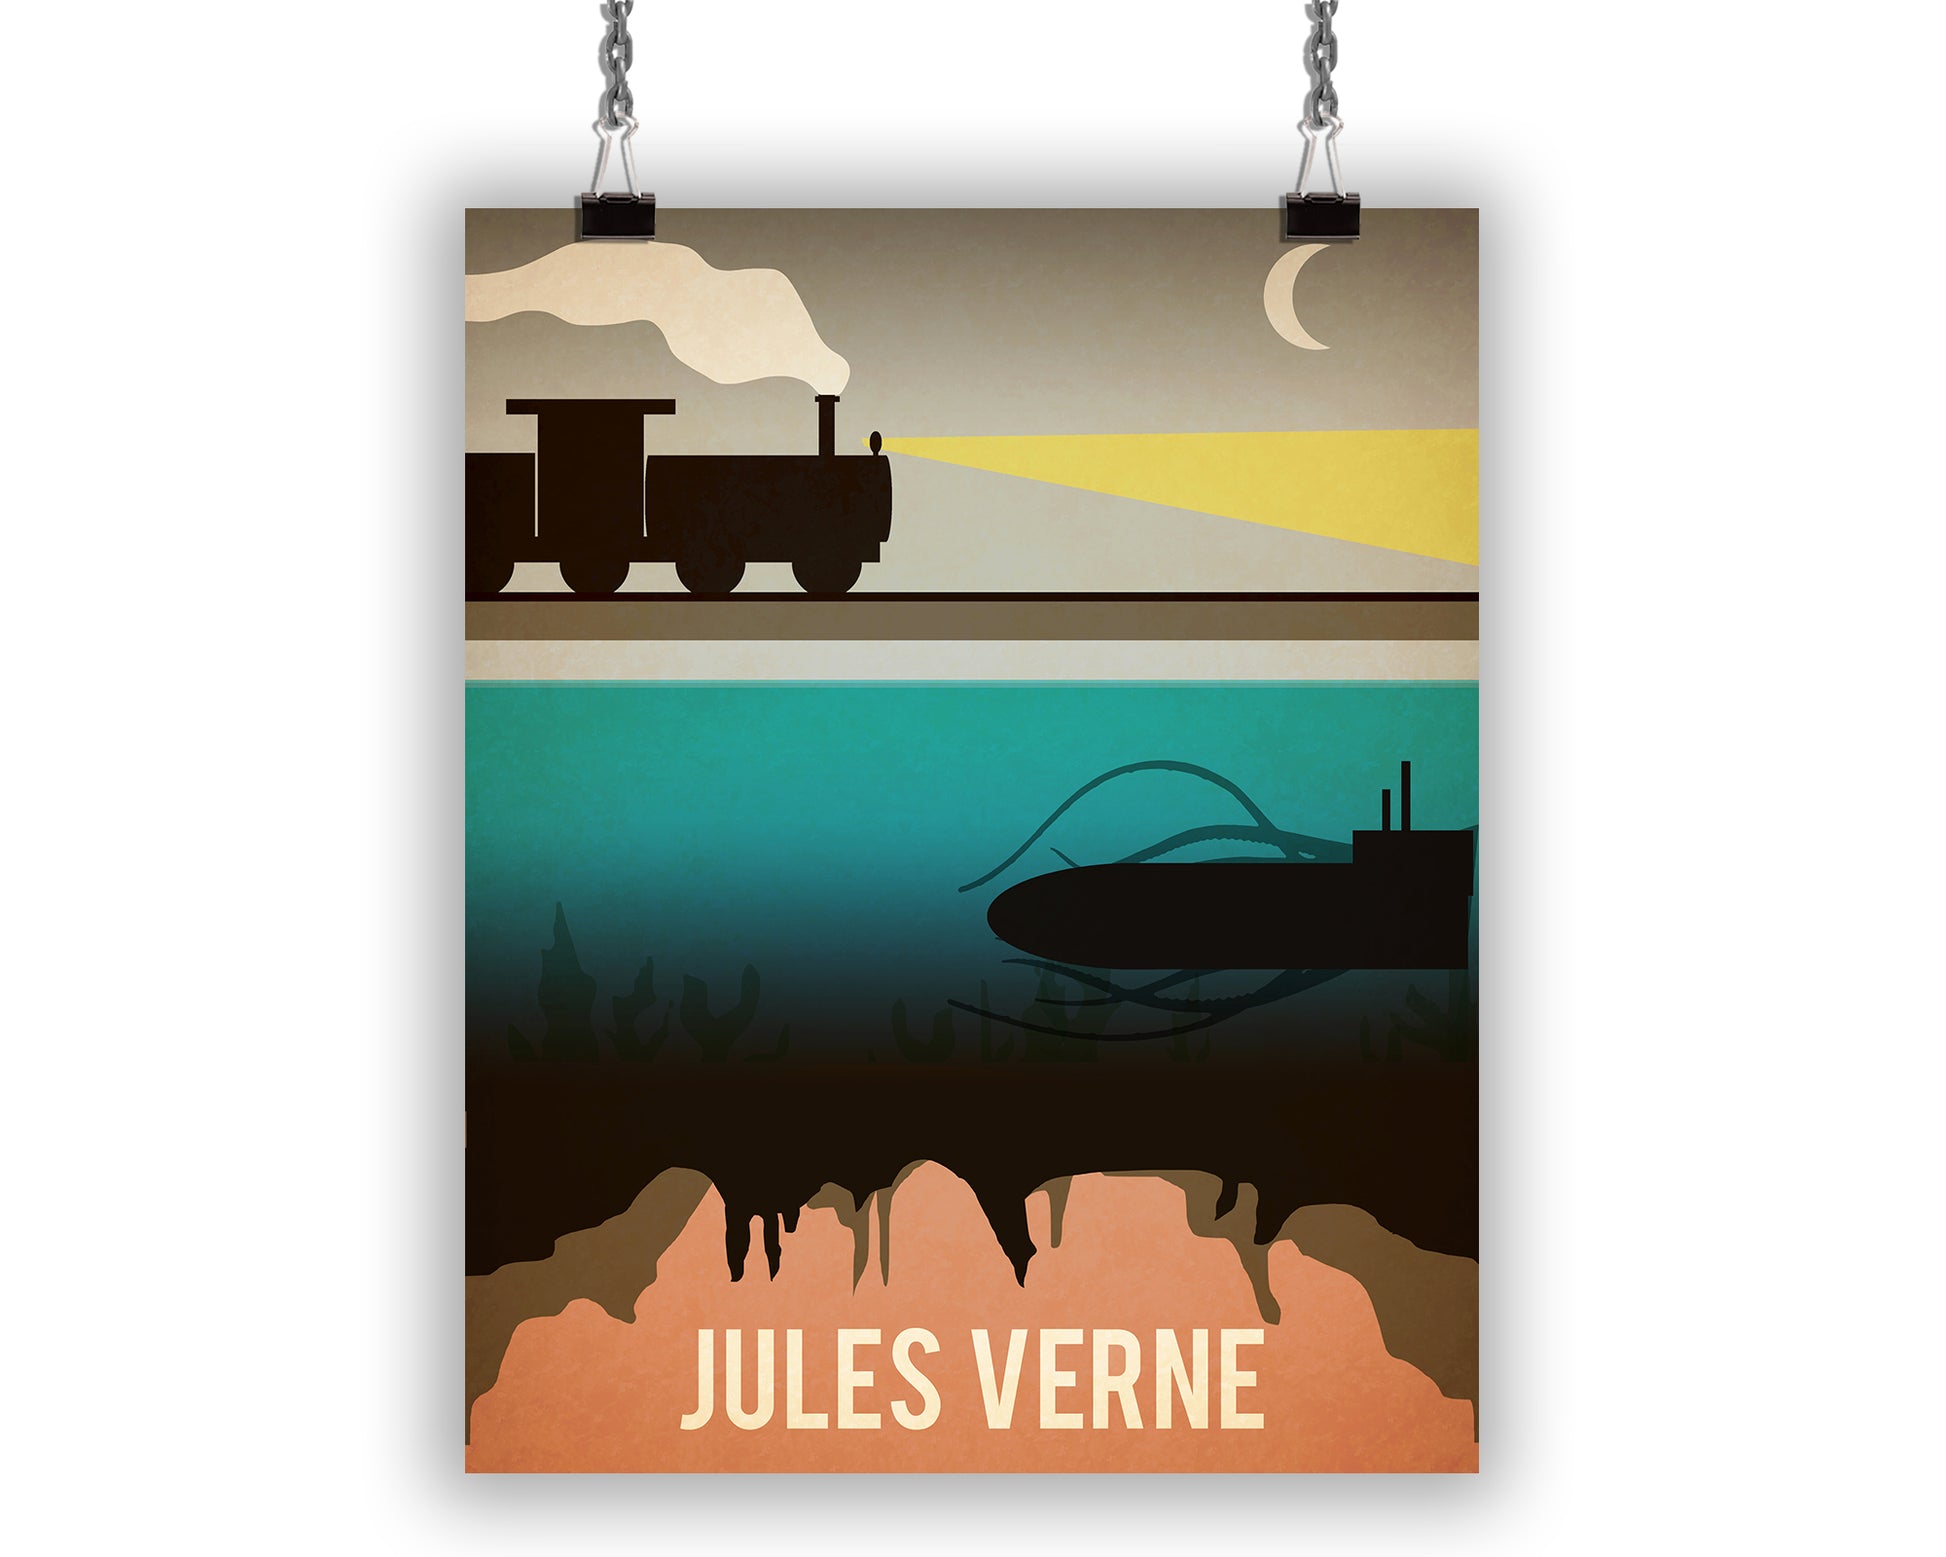 A Jules Verne art print for book lovers with images inspired by "Journey to the Center of the Earth," "20,000 Leagues Under the Sea," "Around the World in 80 Days," and "From the Earth to The Moon,"